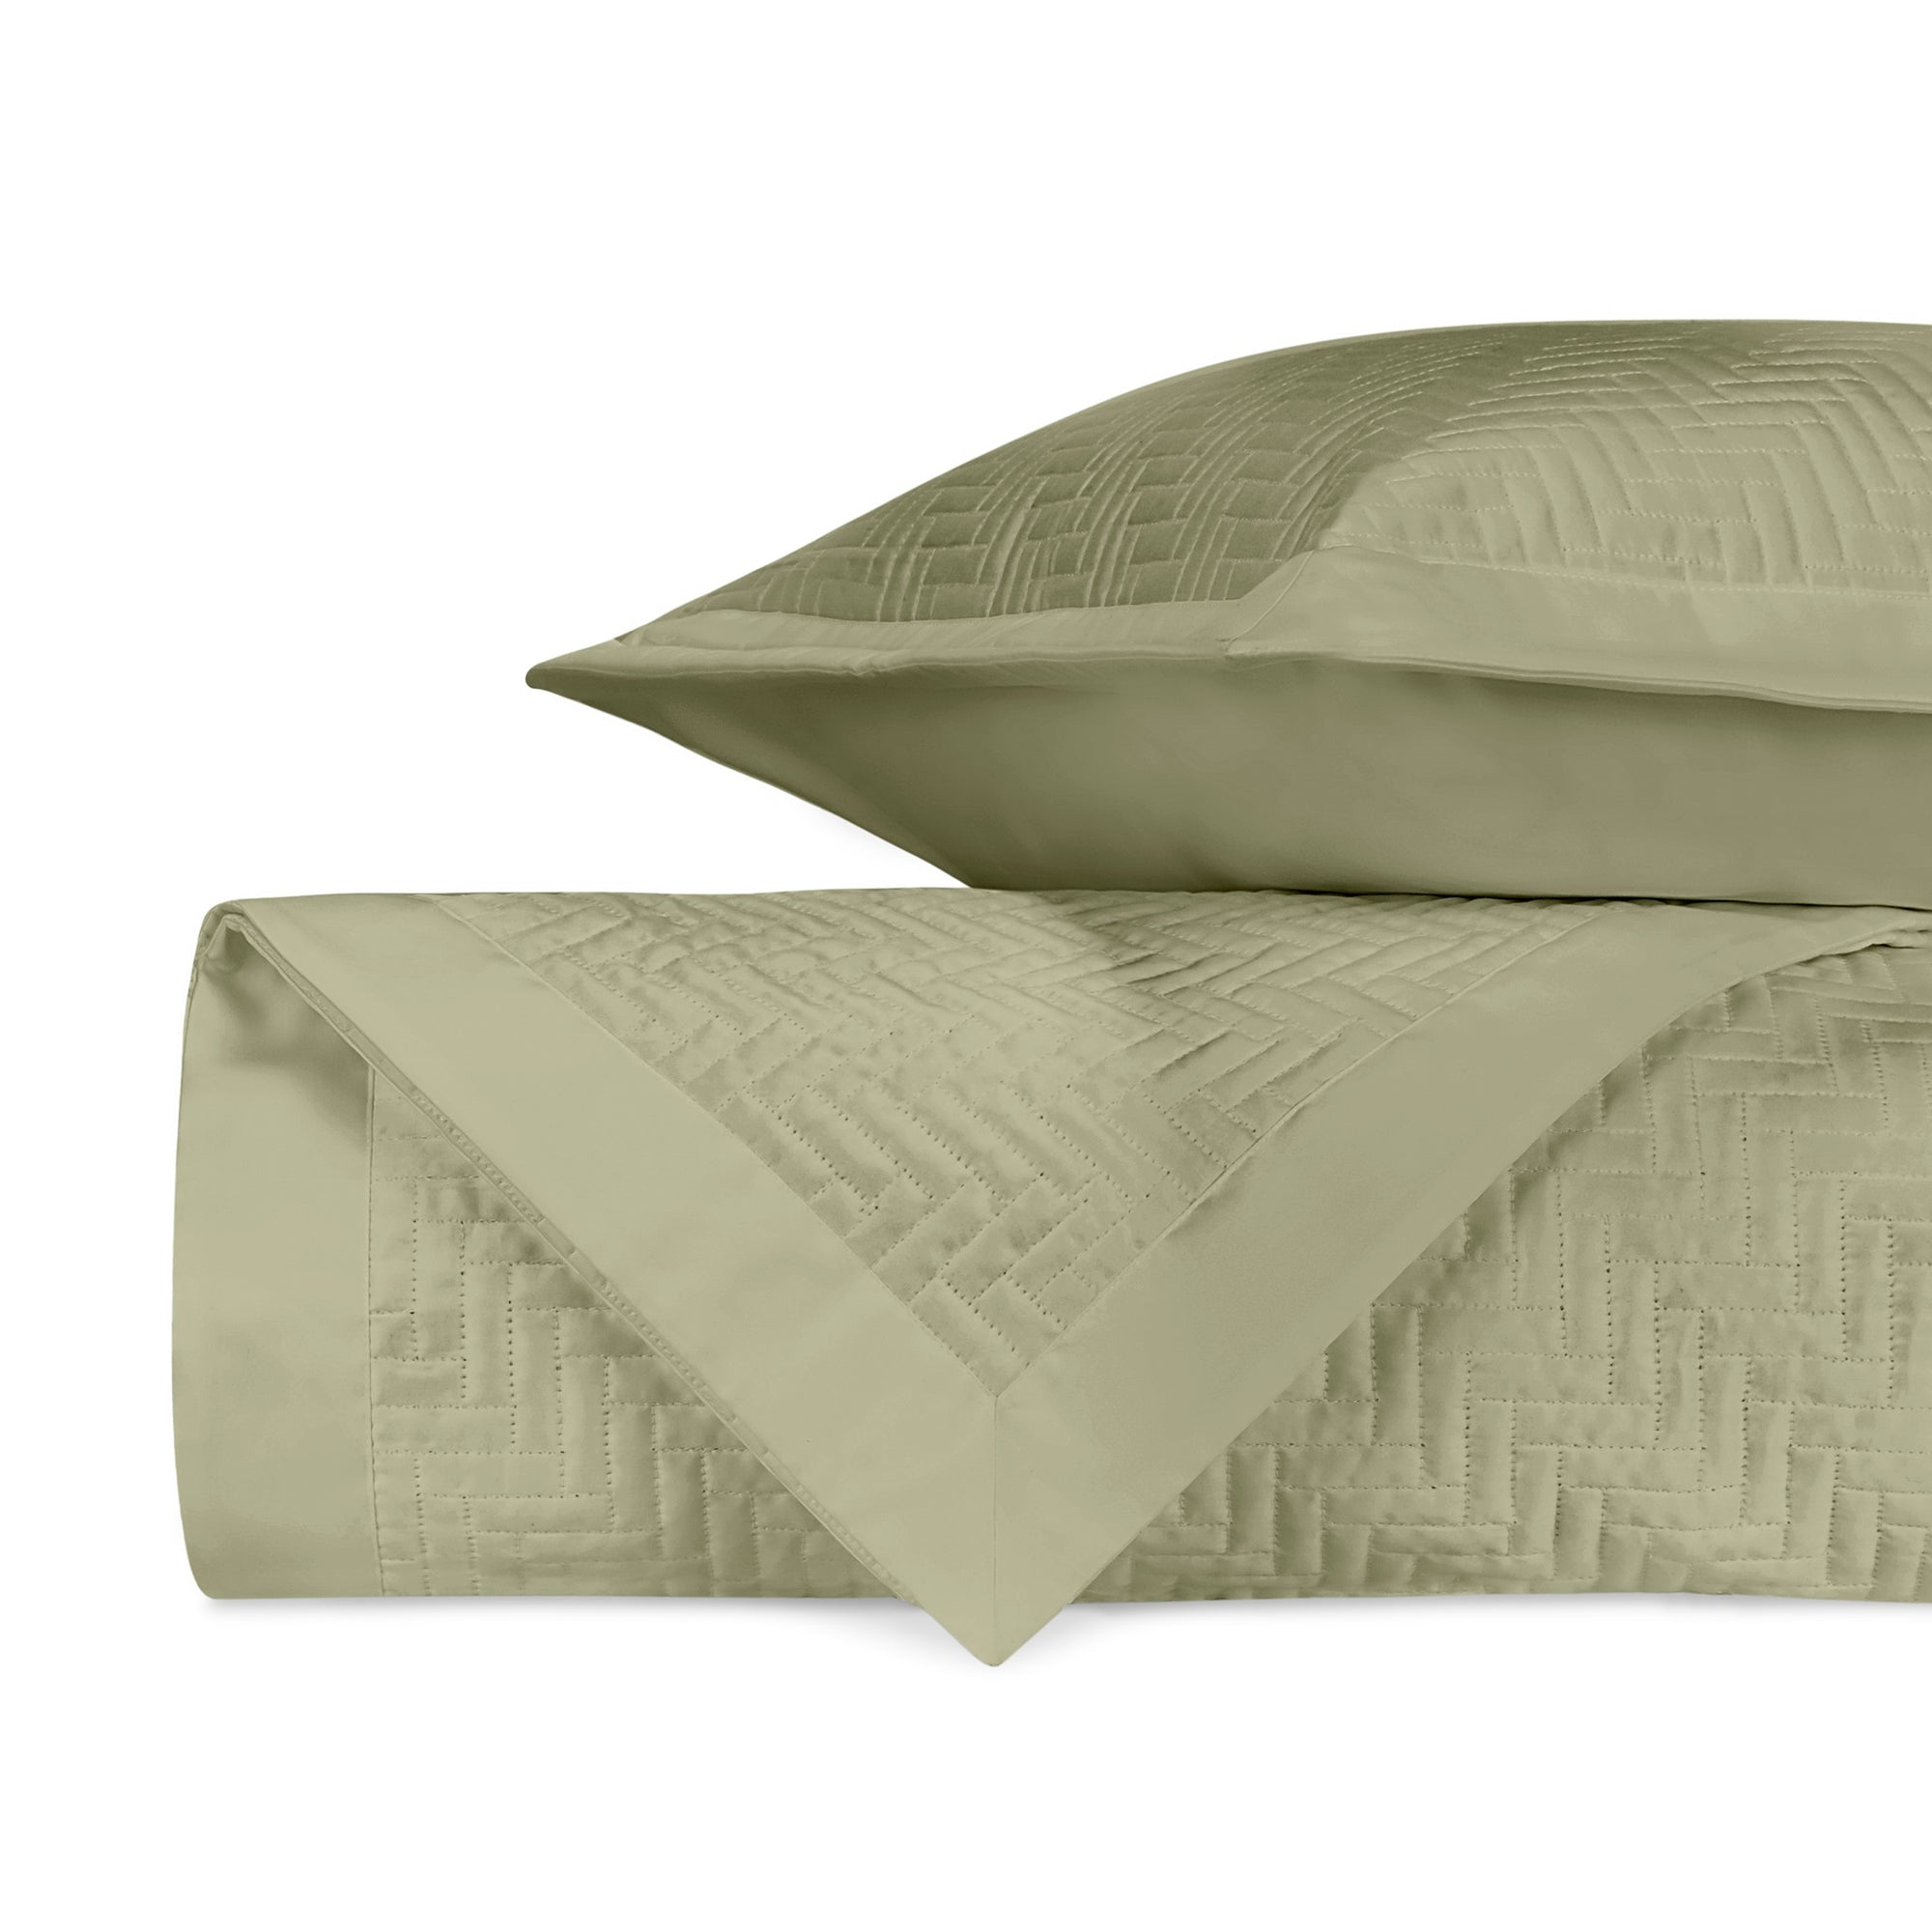 Stack Image of Home Treasures Baxter Royal Sateen Quilted Bedding in Color Piana